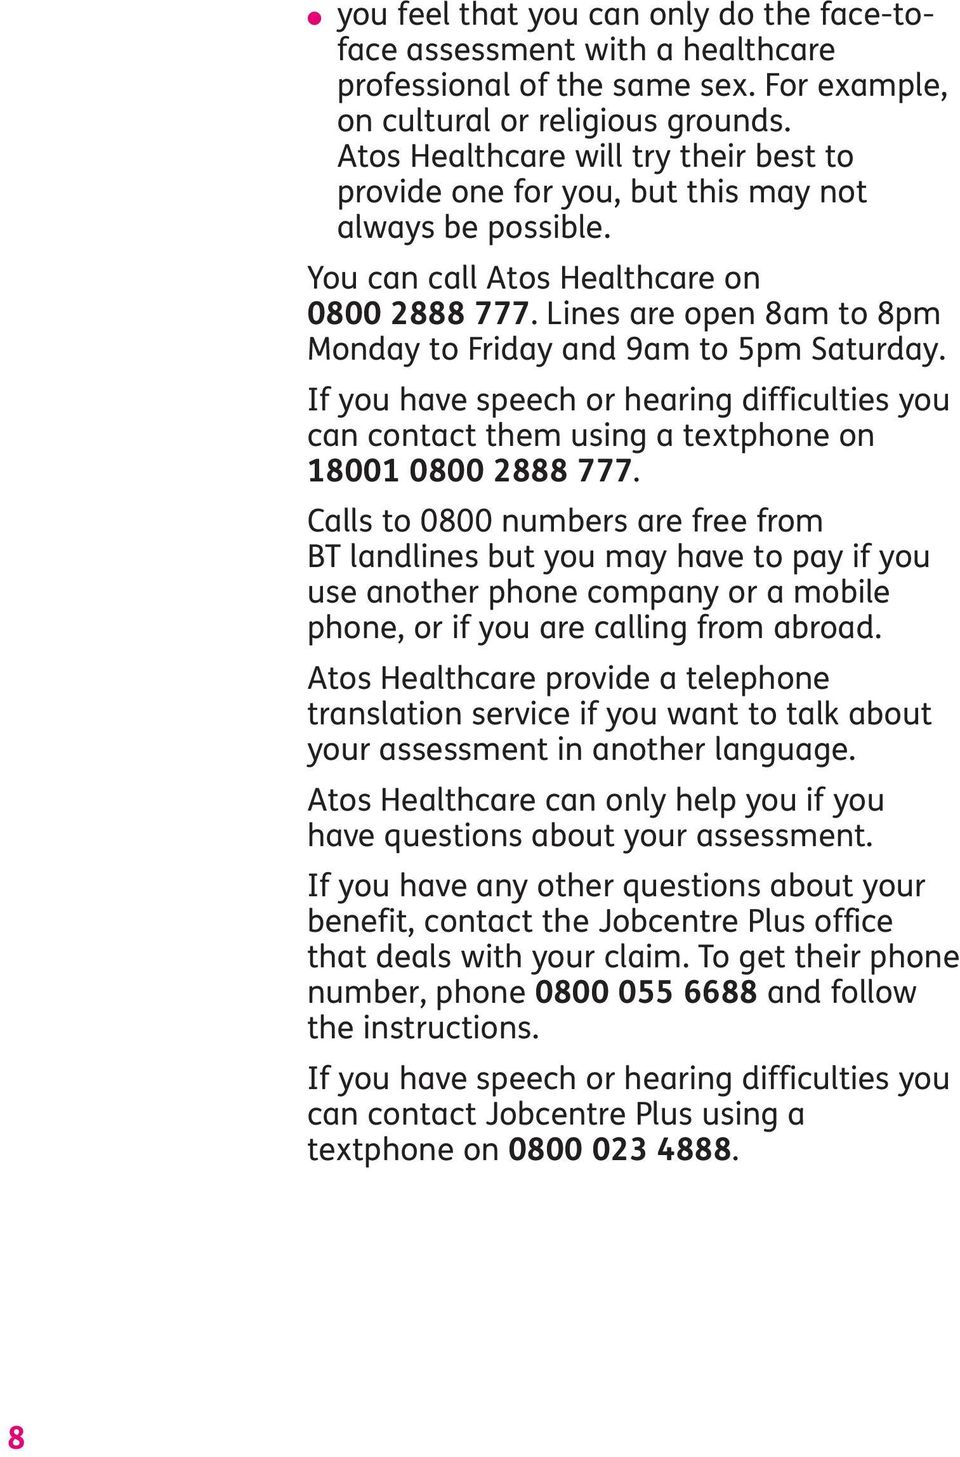 Lines are open 8am to 8pm Monday to Friday and 9am to 5pm Saturday. If you have speech or hearing difficulties you can contact them using a textphone on 18001 0800 2888 777.